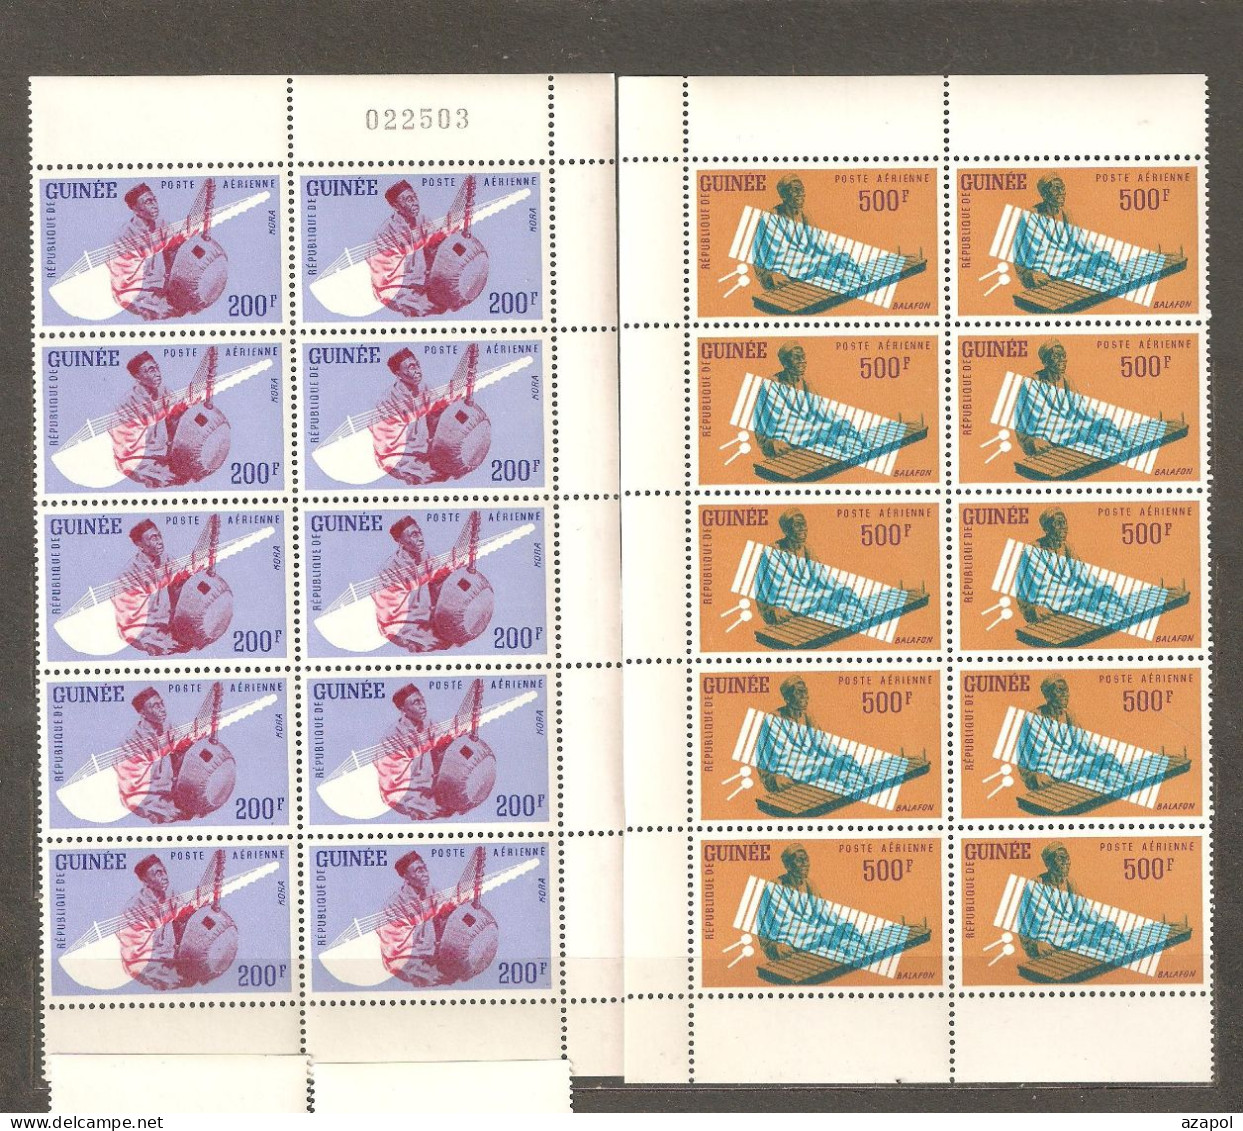 Guinee: 2 Mint Stamps Of Set In Block Of 10 - Airmail, Musical Instruments, 1962, Mi#126-7, MNH - Guinée (1958-...)